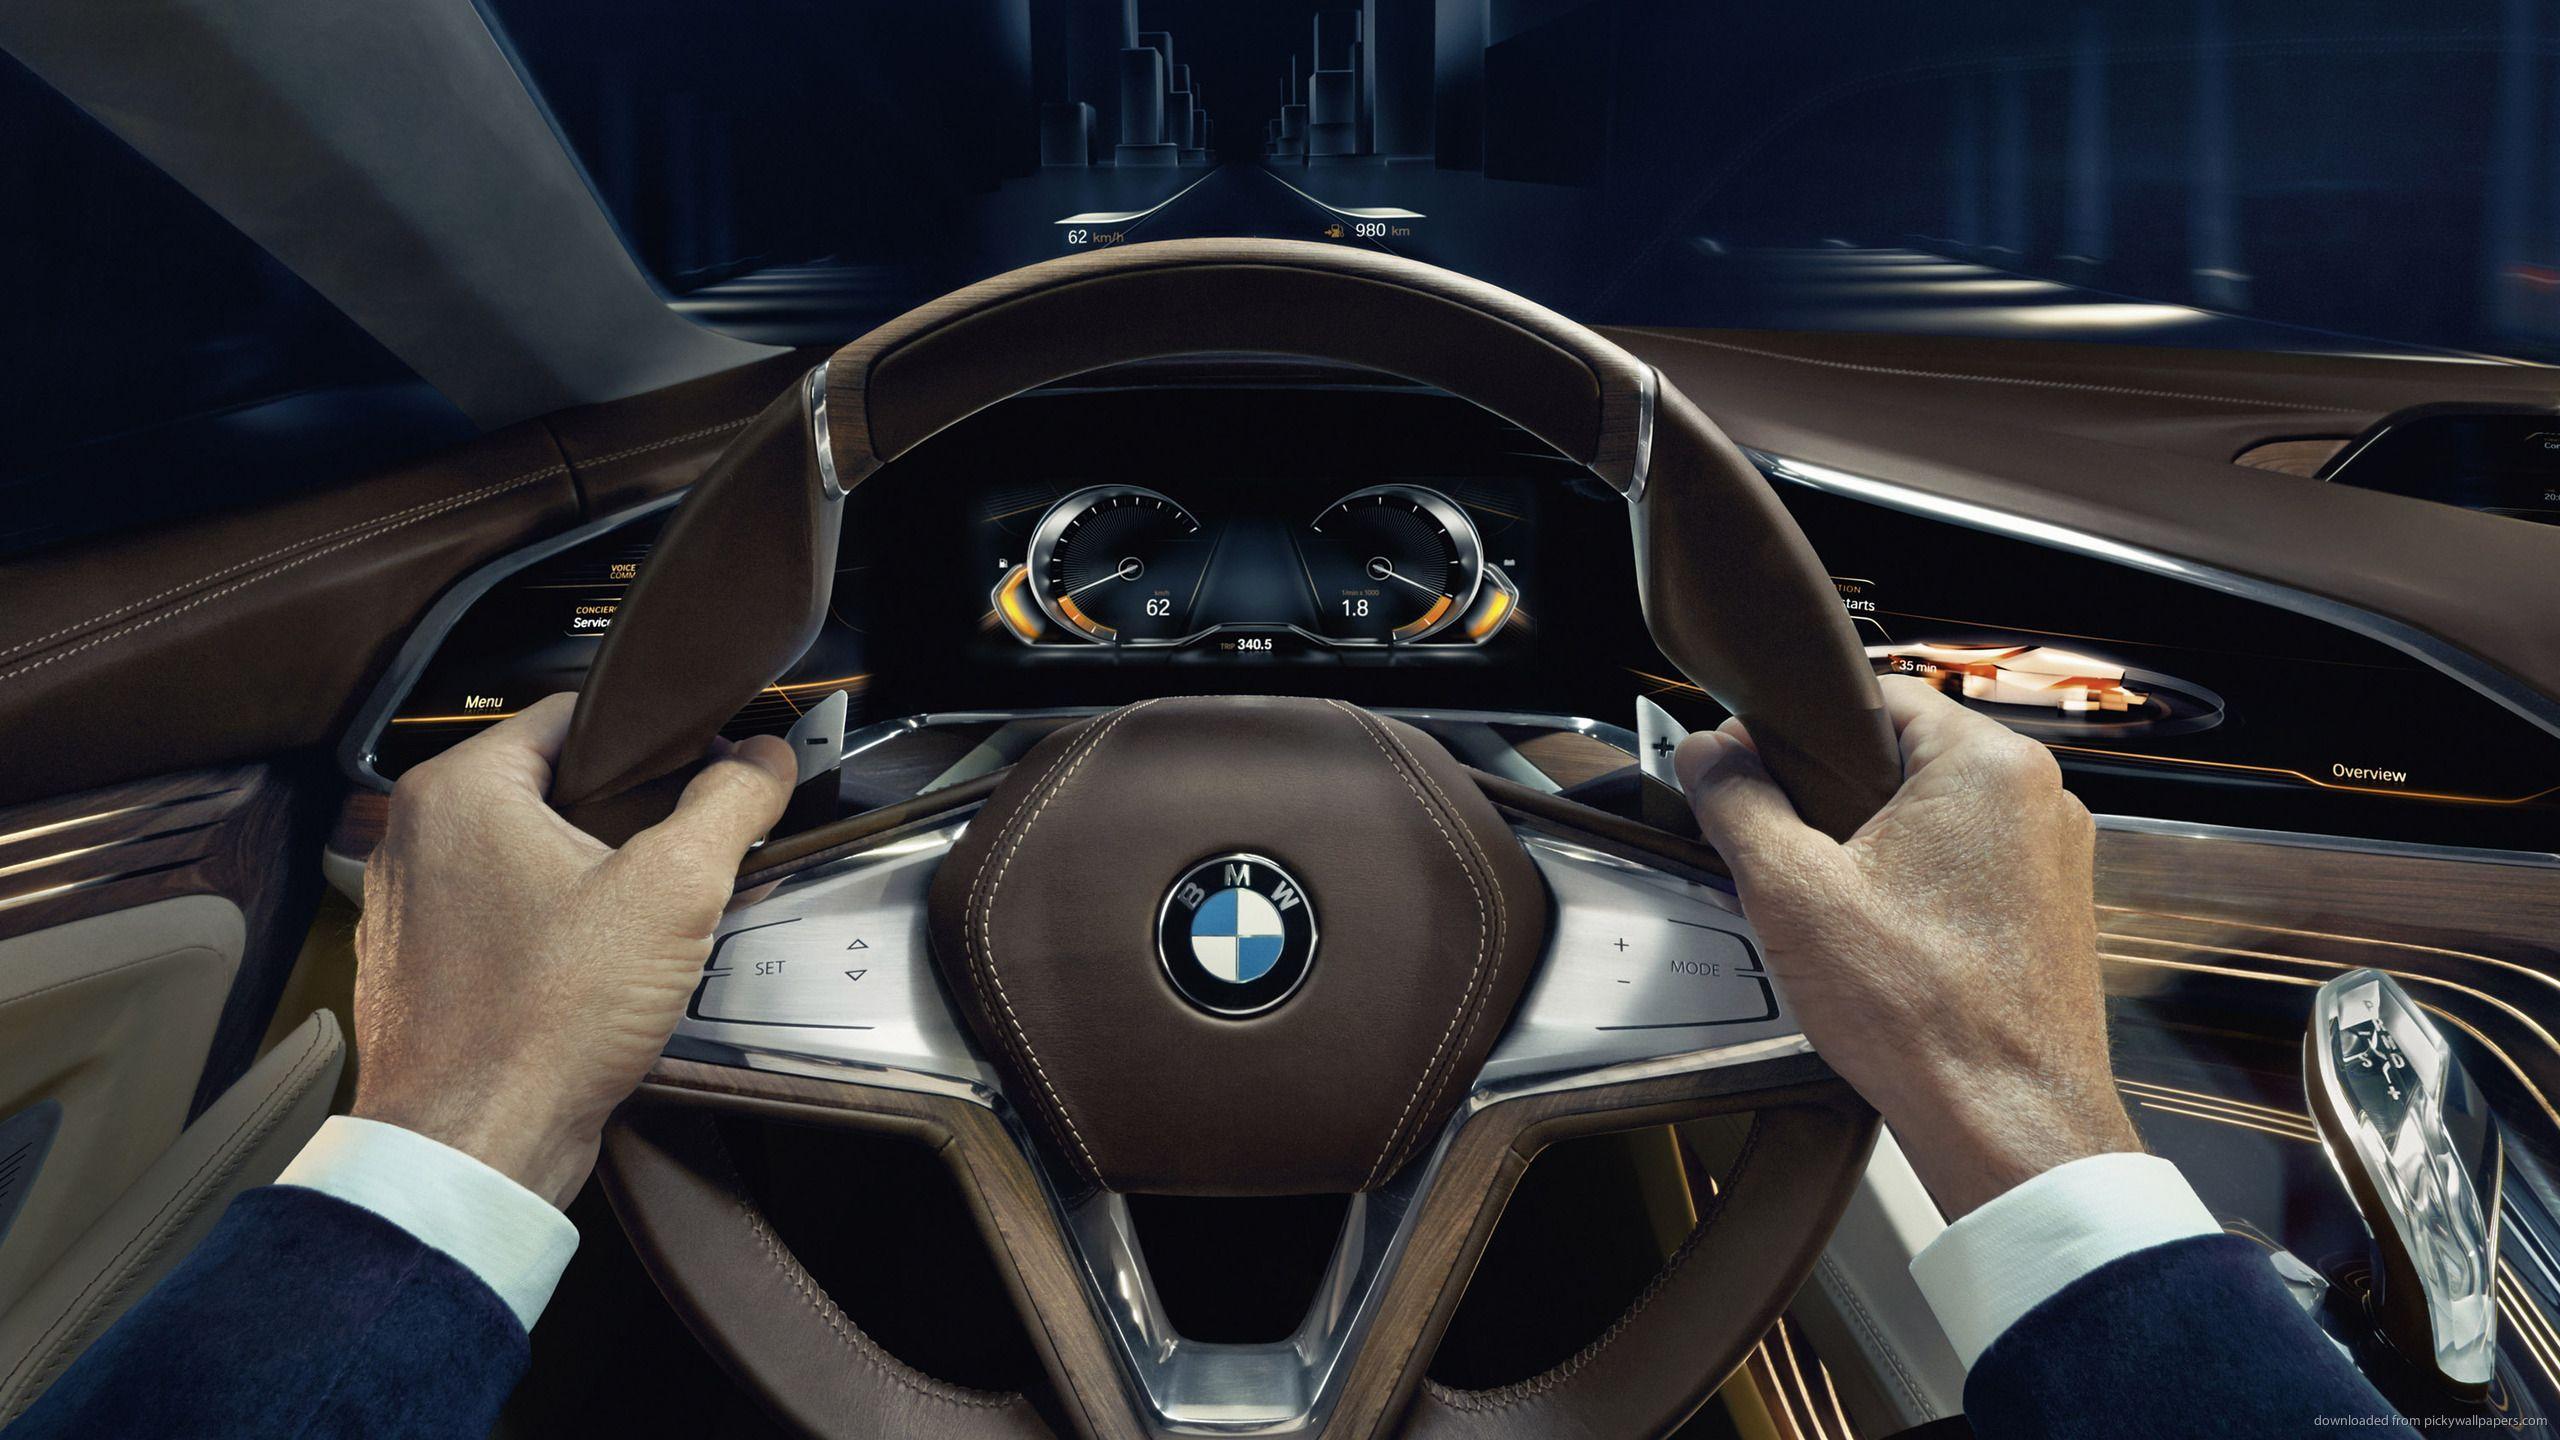 Download 2560x1440 Driving BMW Vision Future Luxury Concept Wallpaper